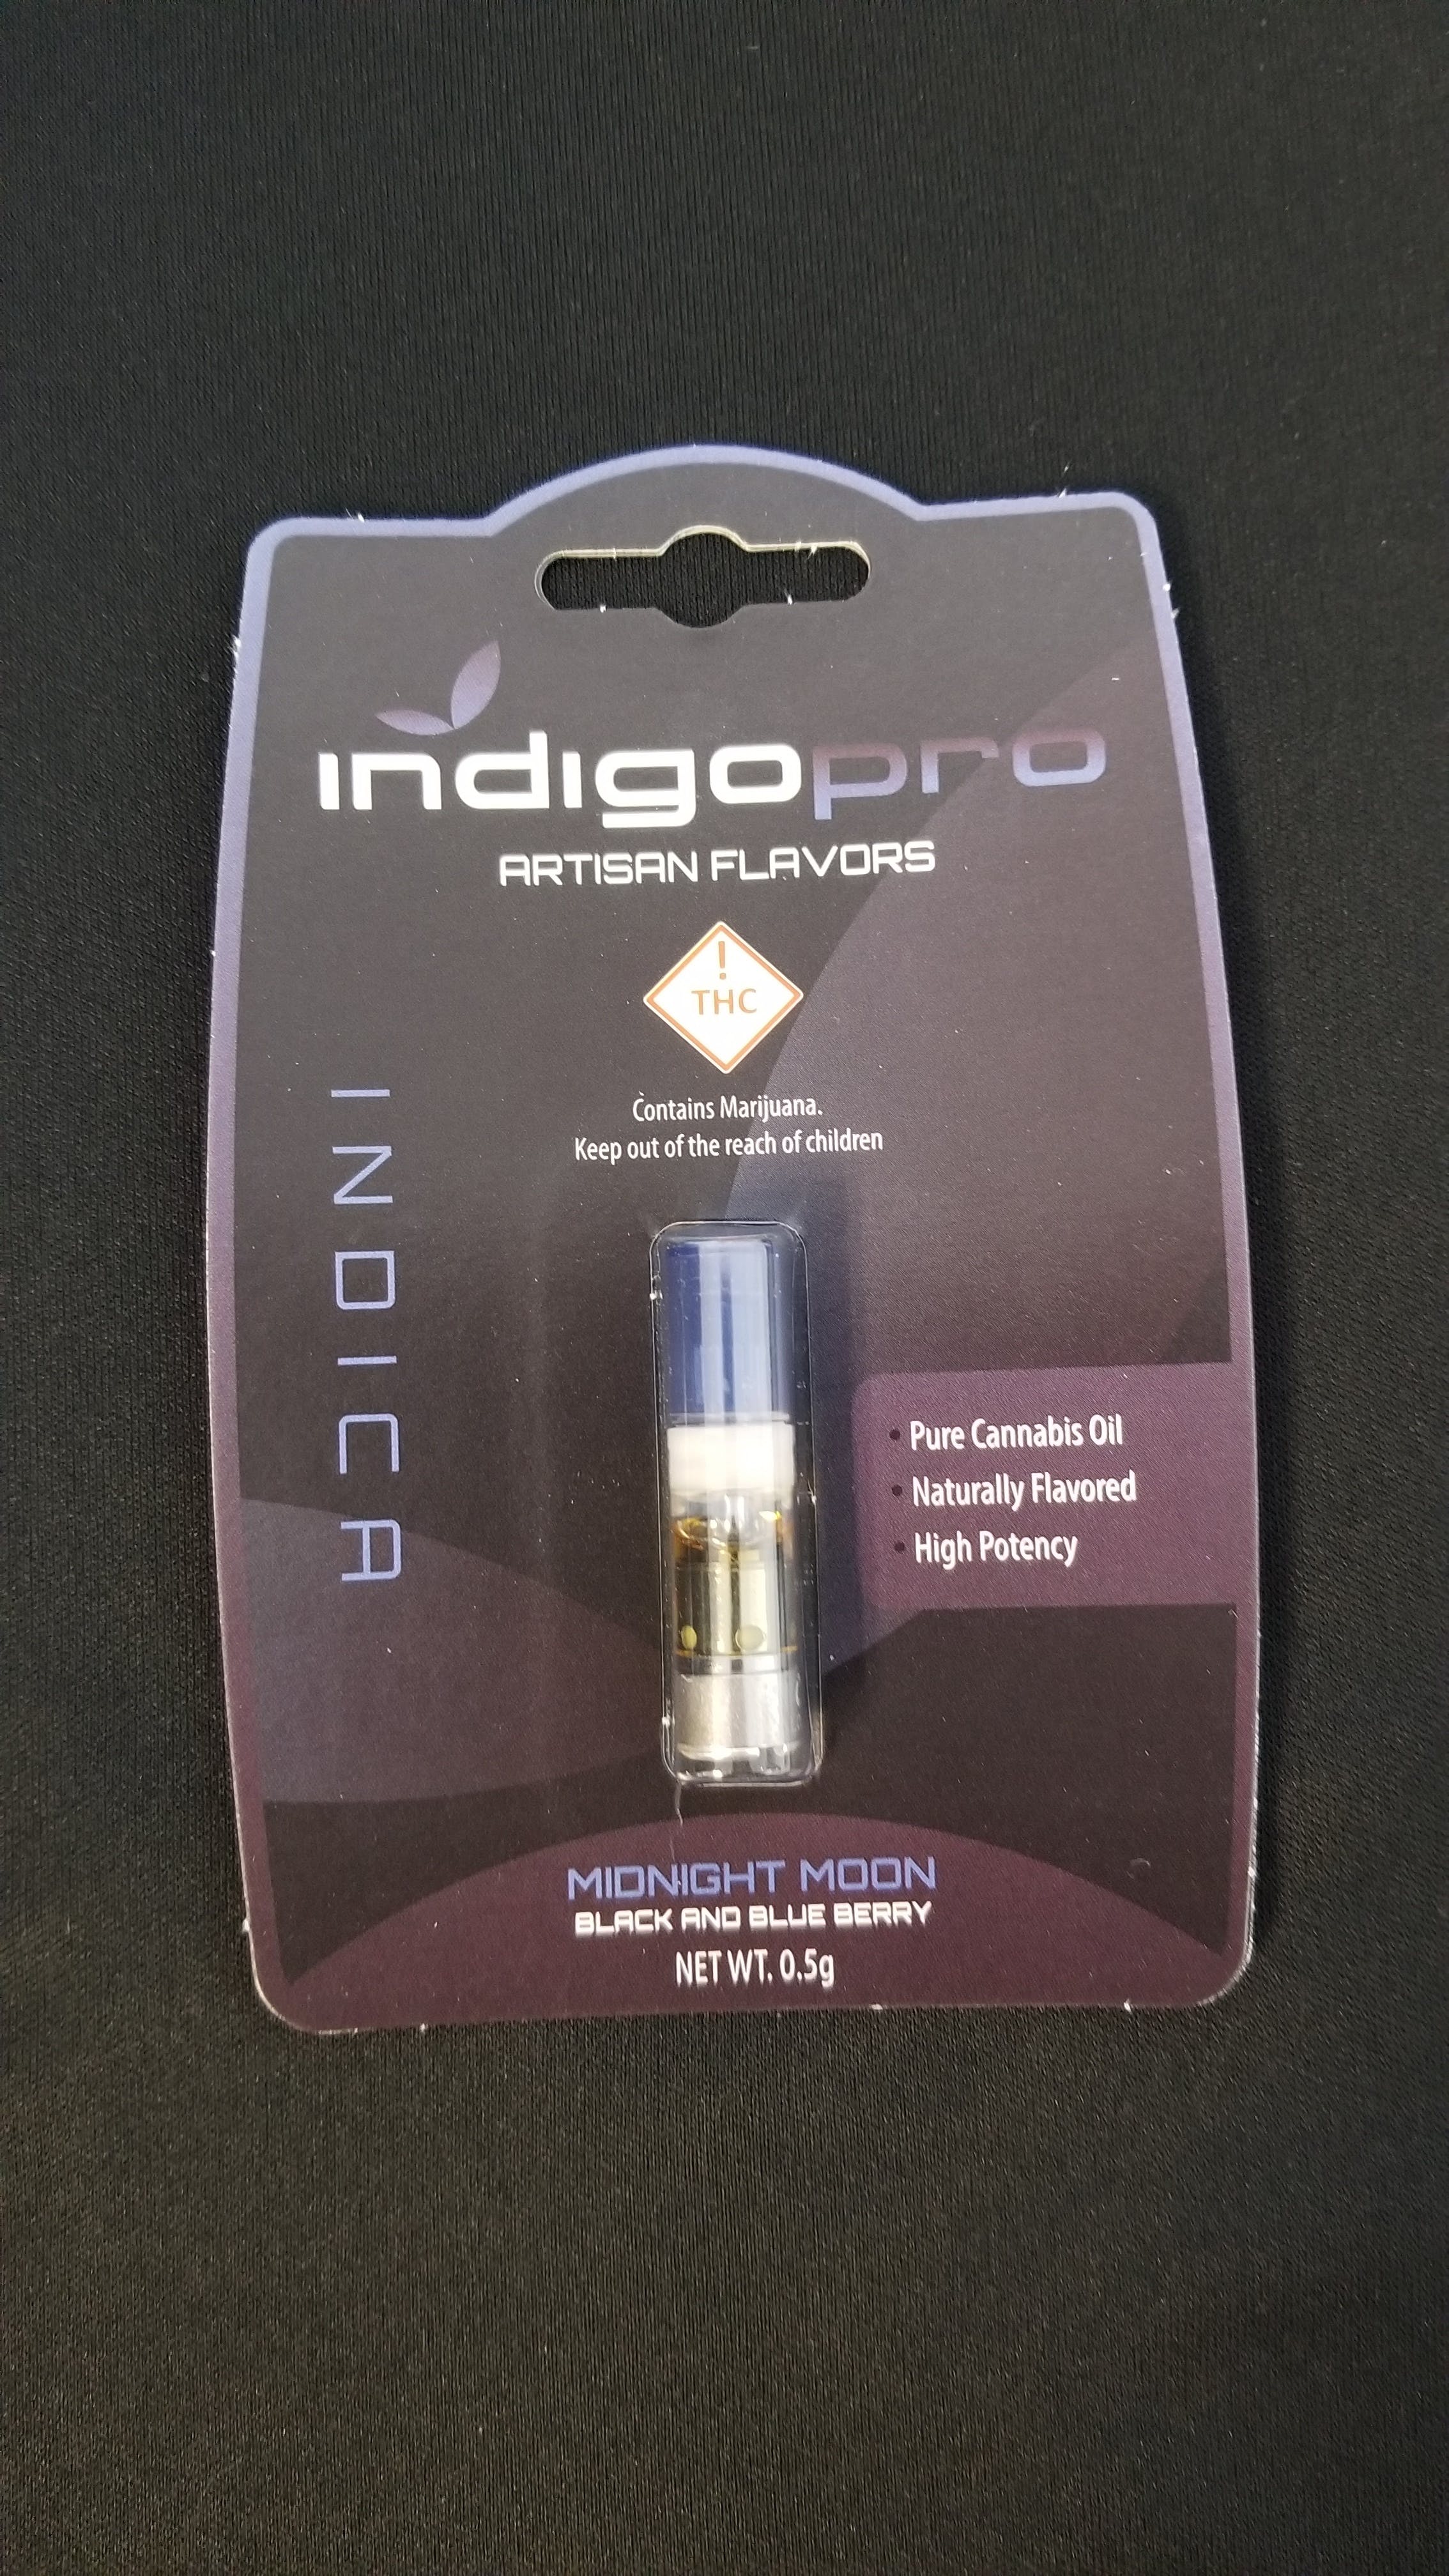 concentrate-airopro-midnight-moon-indica-cartridge-5g